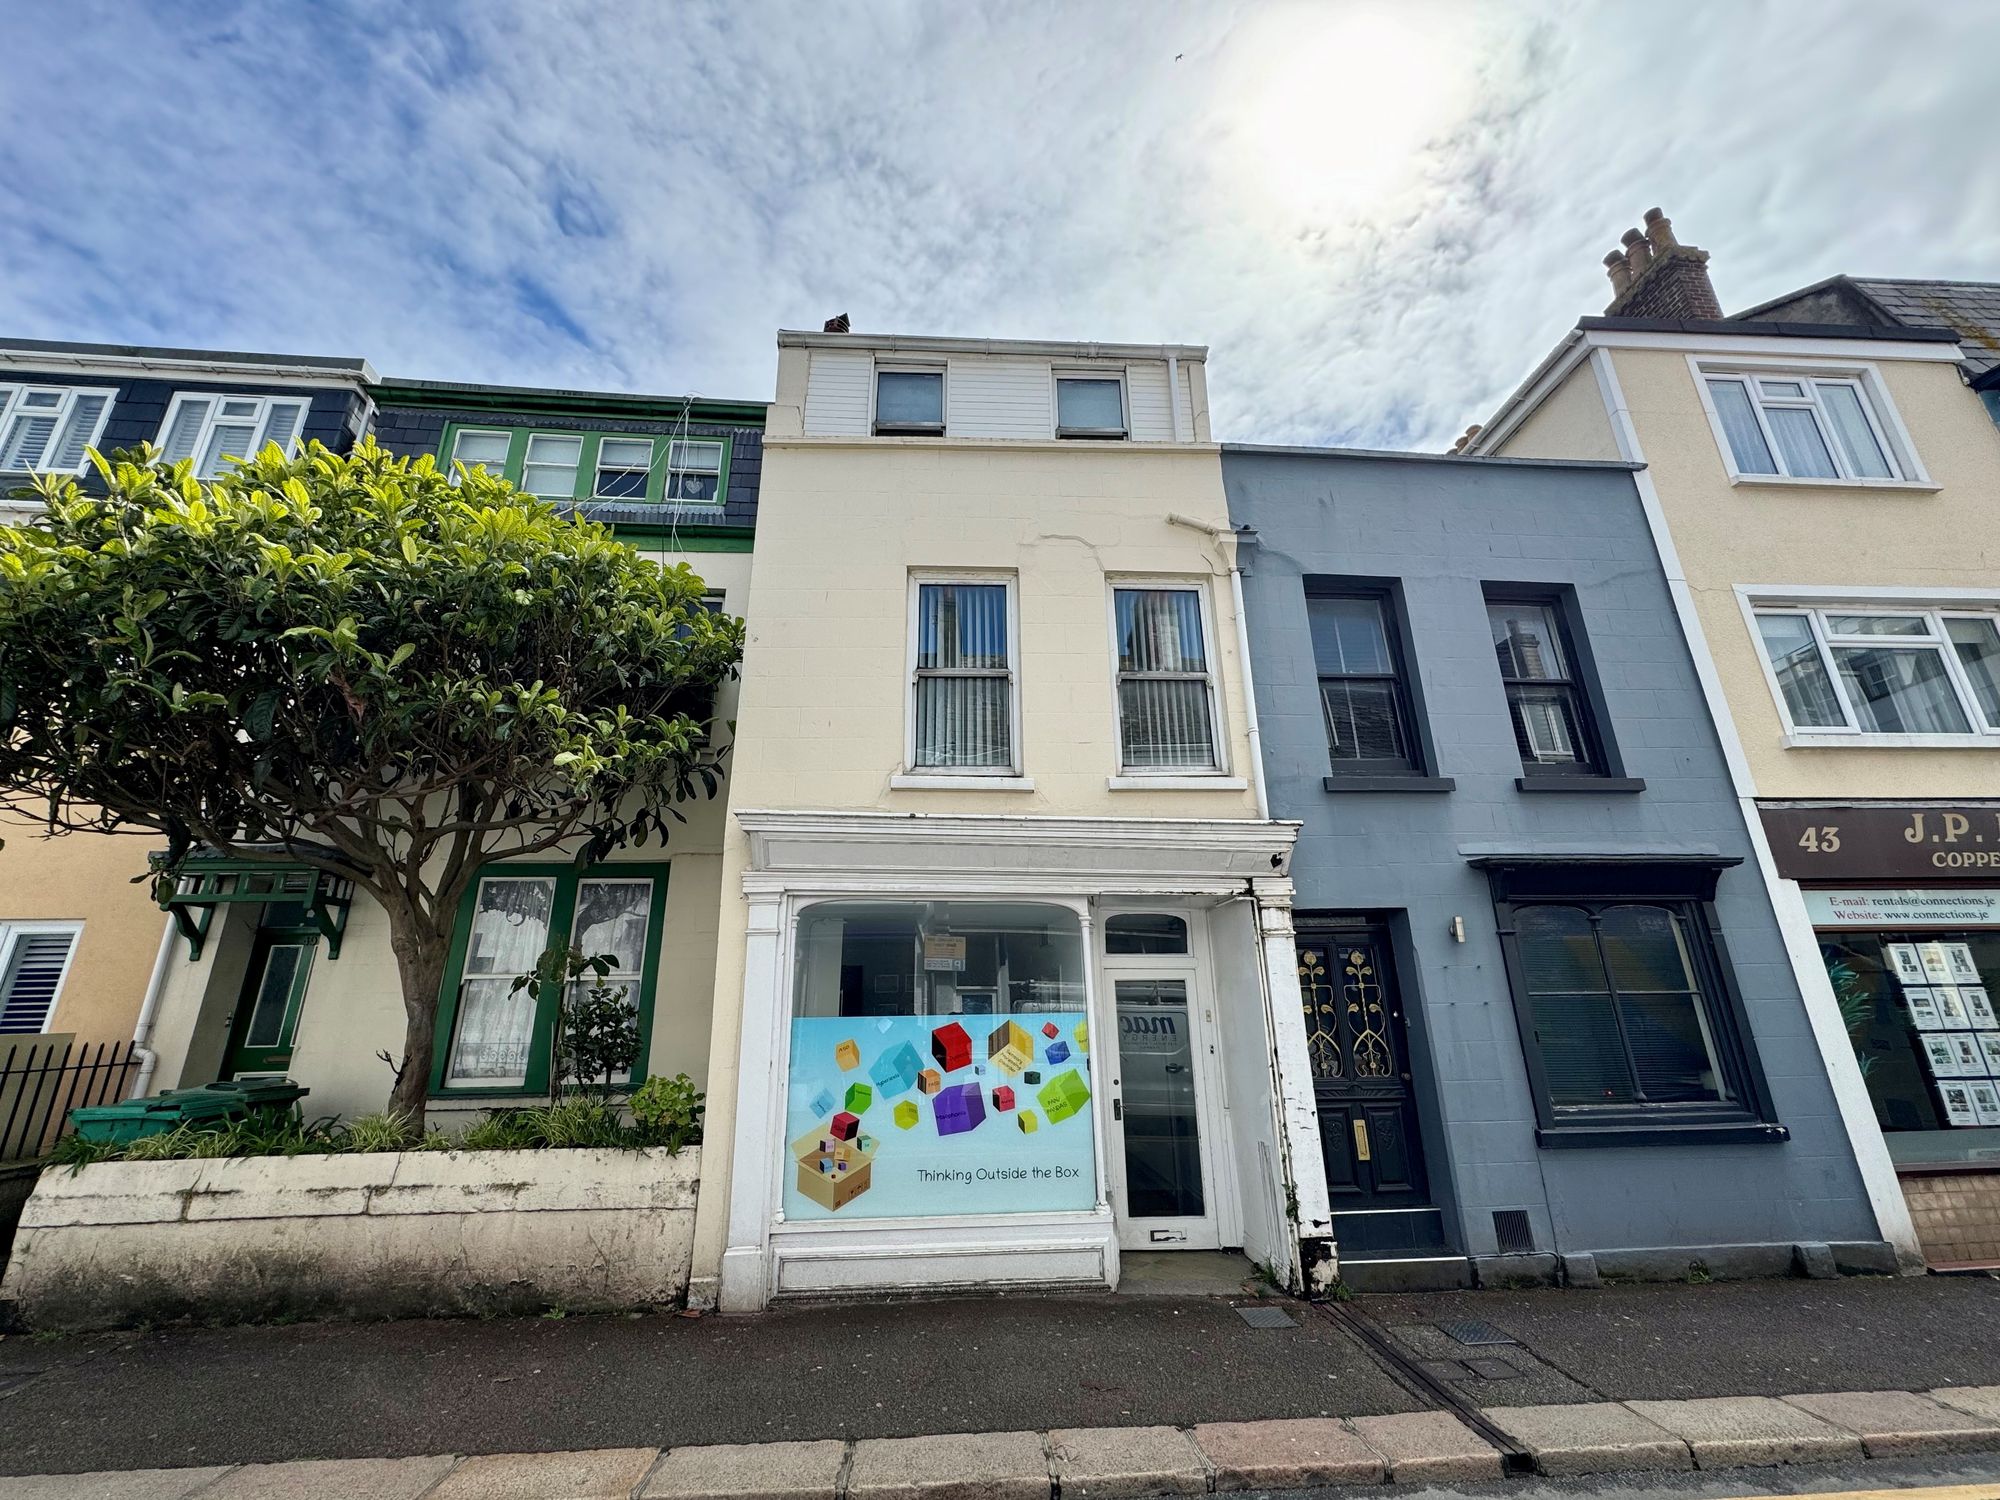 1 bed Property For Sale in St. Helier, Jersey